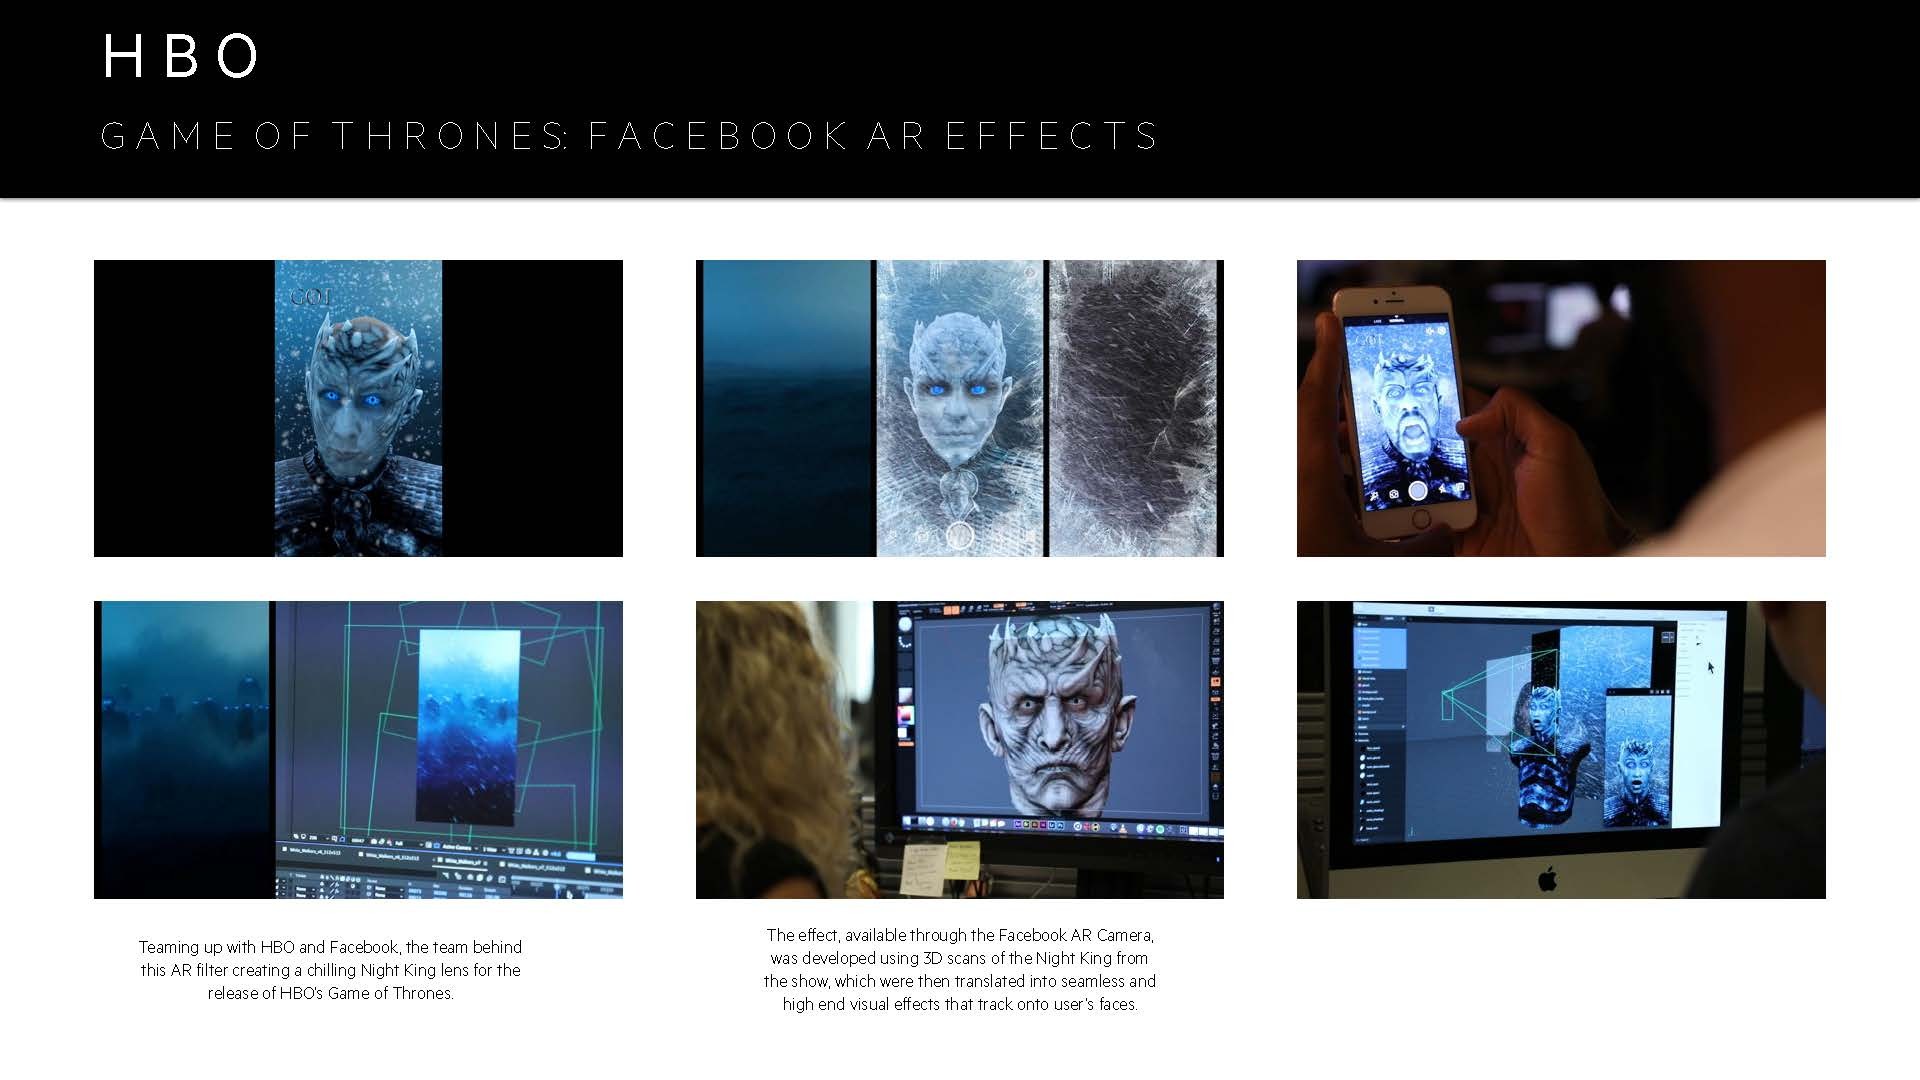 Game of Thrones: Facebook AR Effects